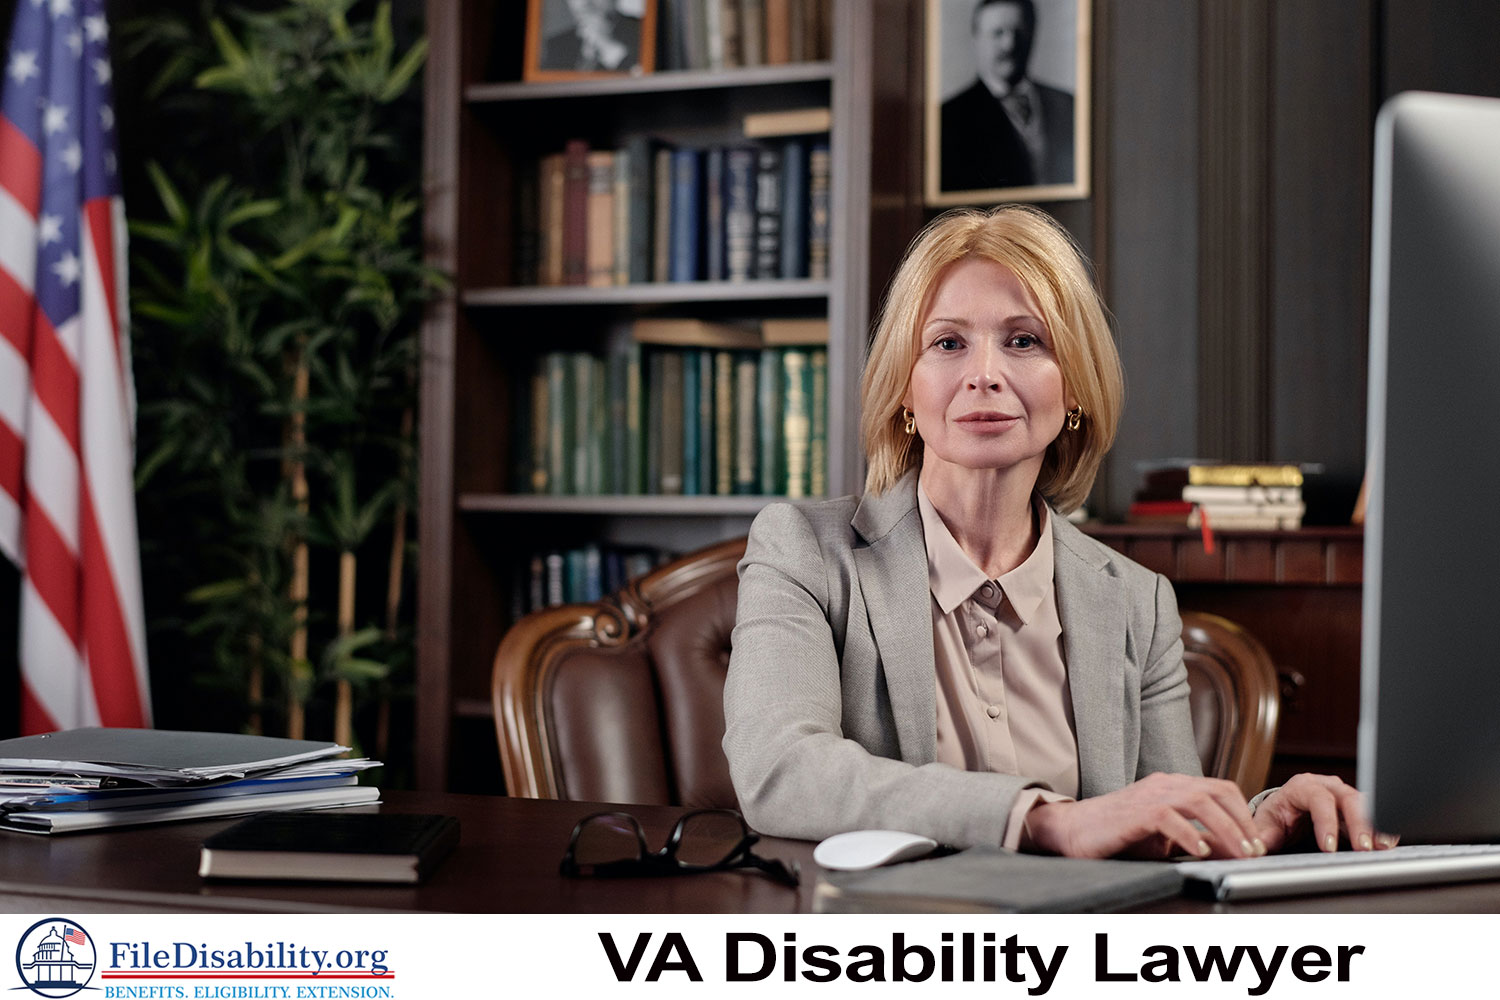 Should You Hire a VA Disability Lawyer?